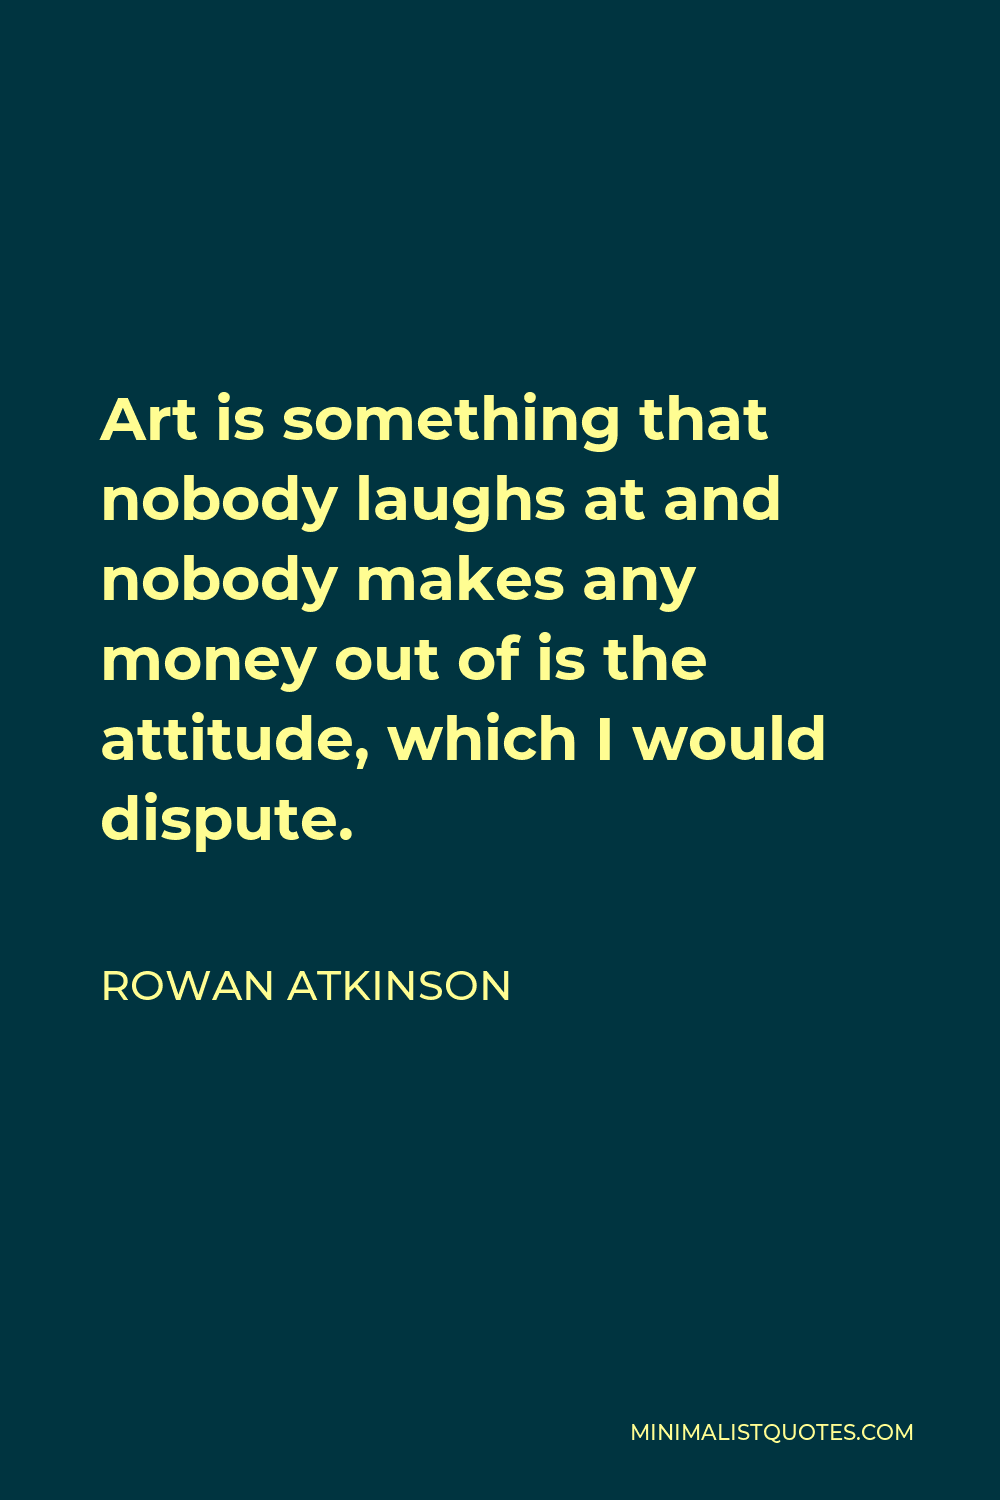 Rowan Atkinson Quote - Art is something that nobody laughs at and nobody makes any money out of is the attitude, which I would dispute.